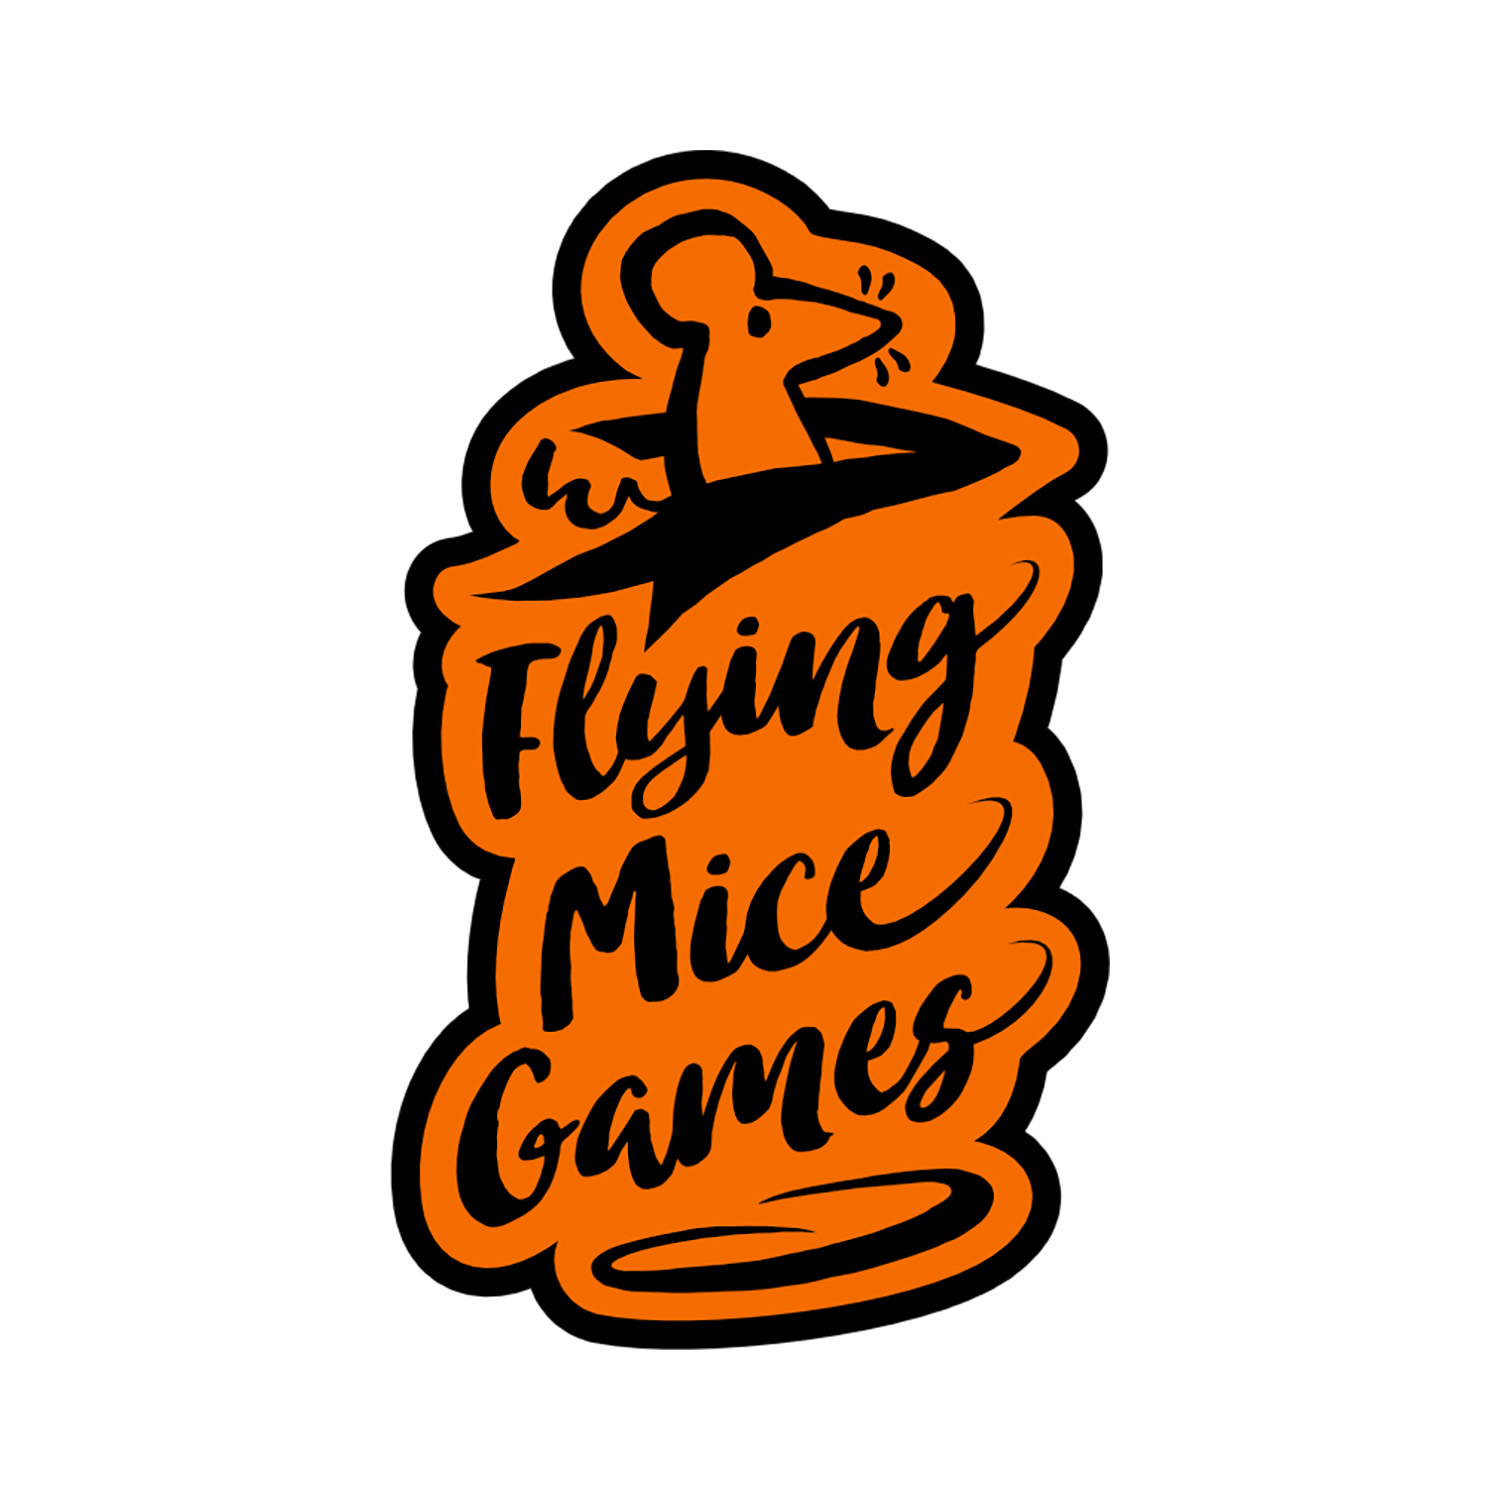 Flying Mice Games